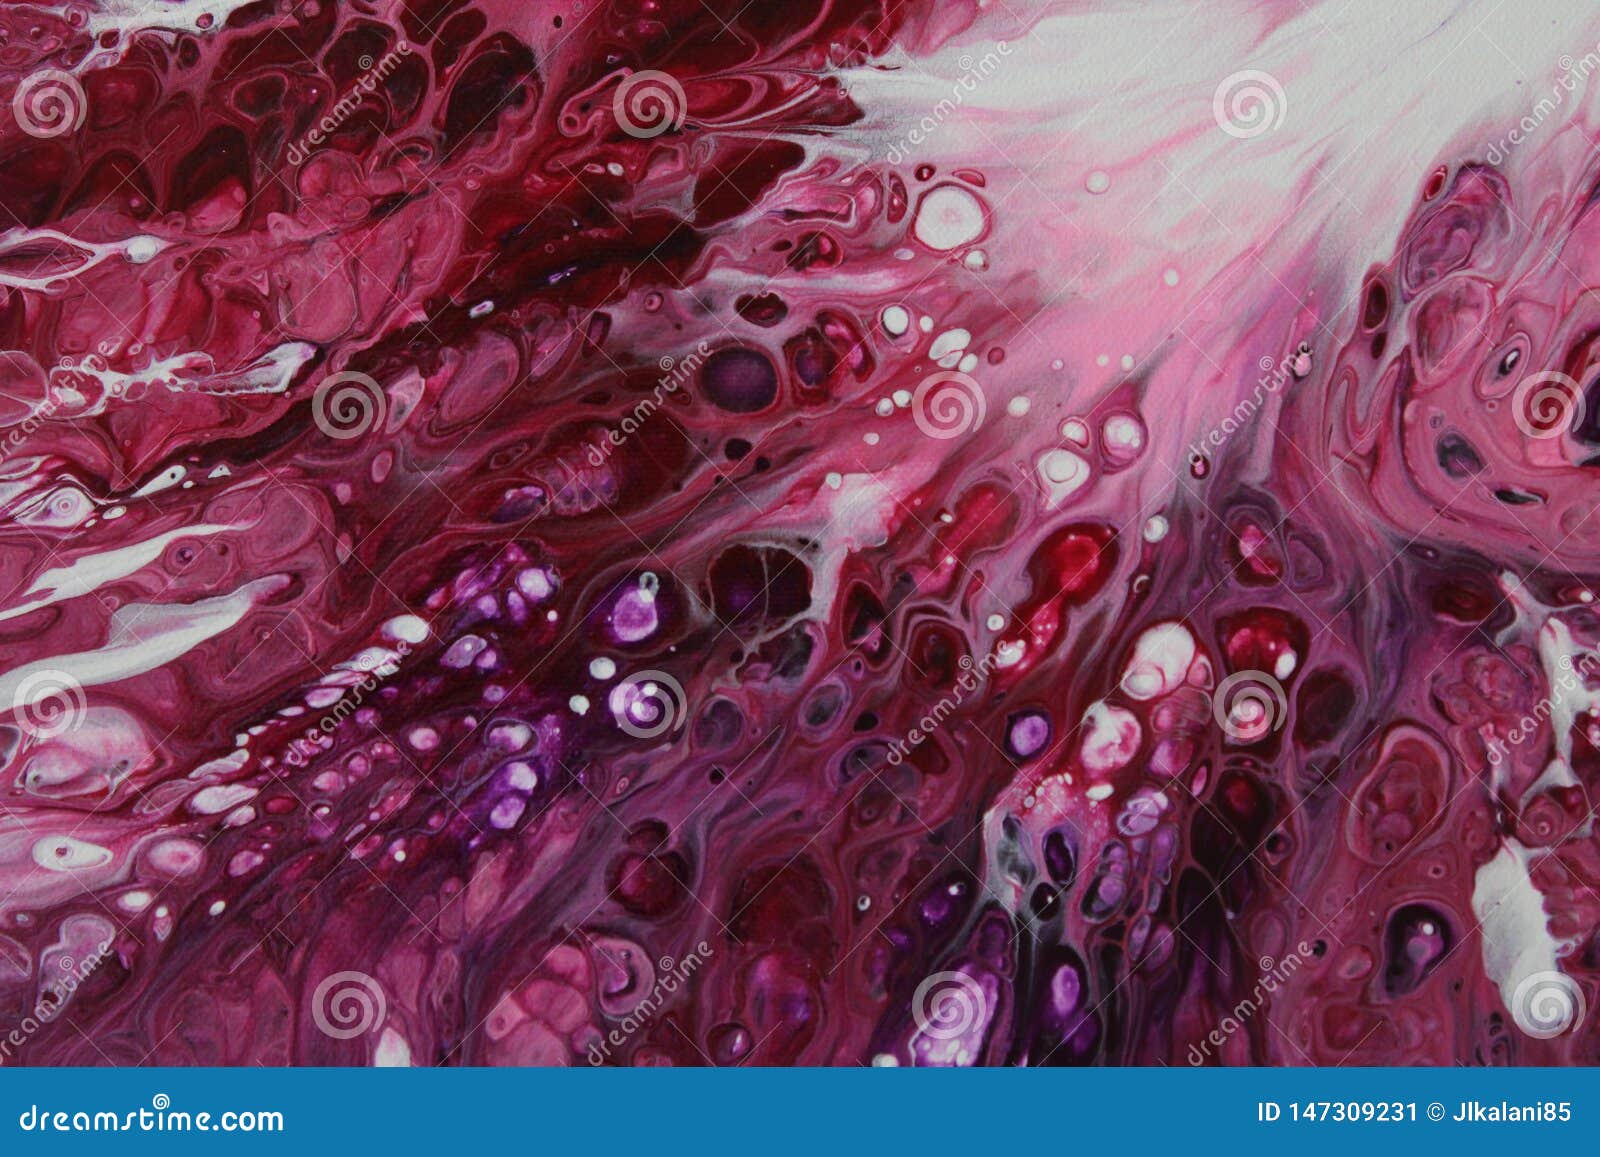 closeup of a flowing abstract acrylic pour painting in shades of pink and white.